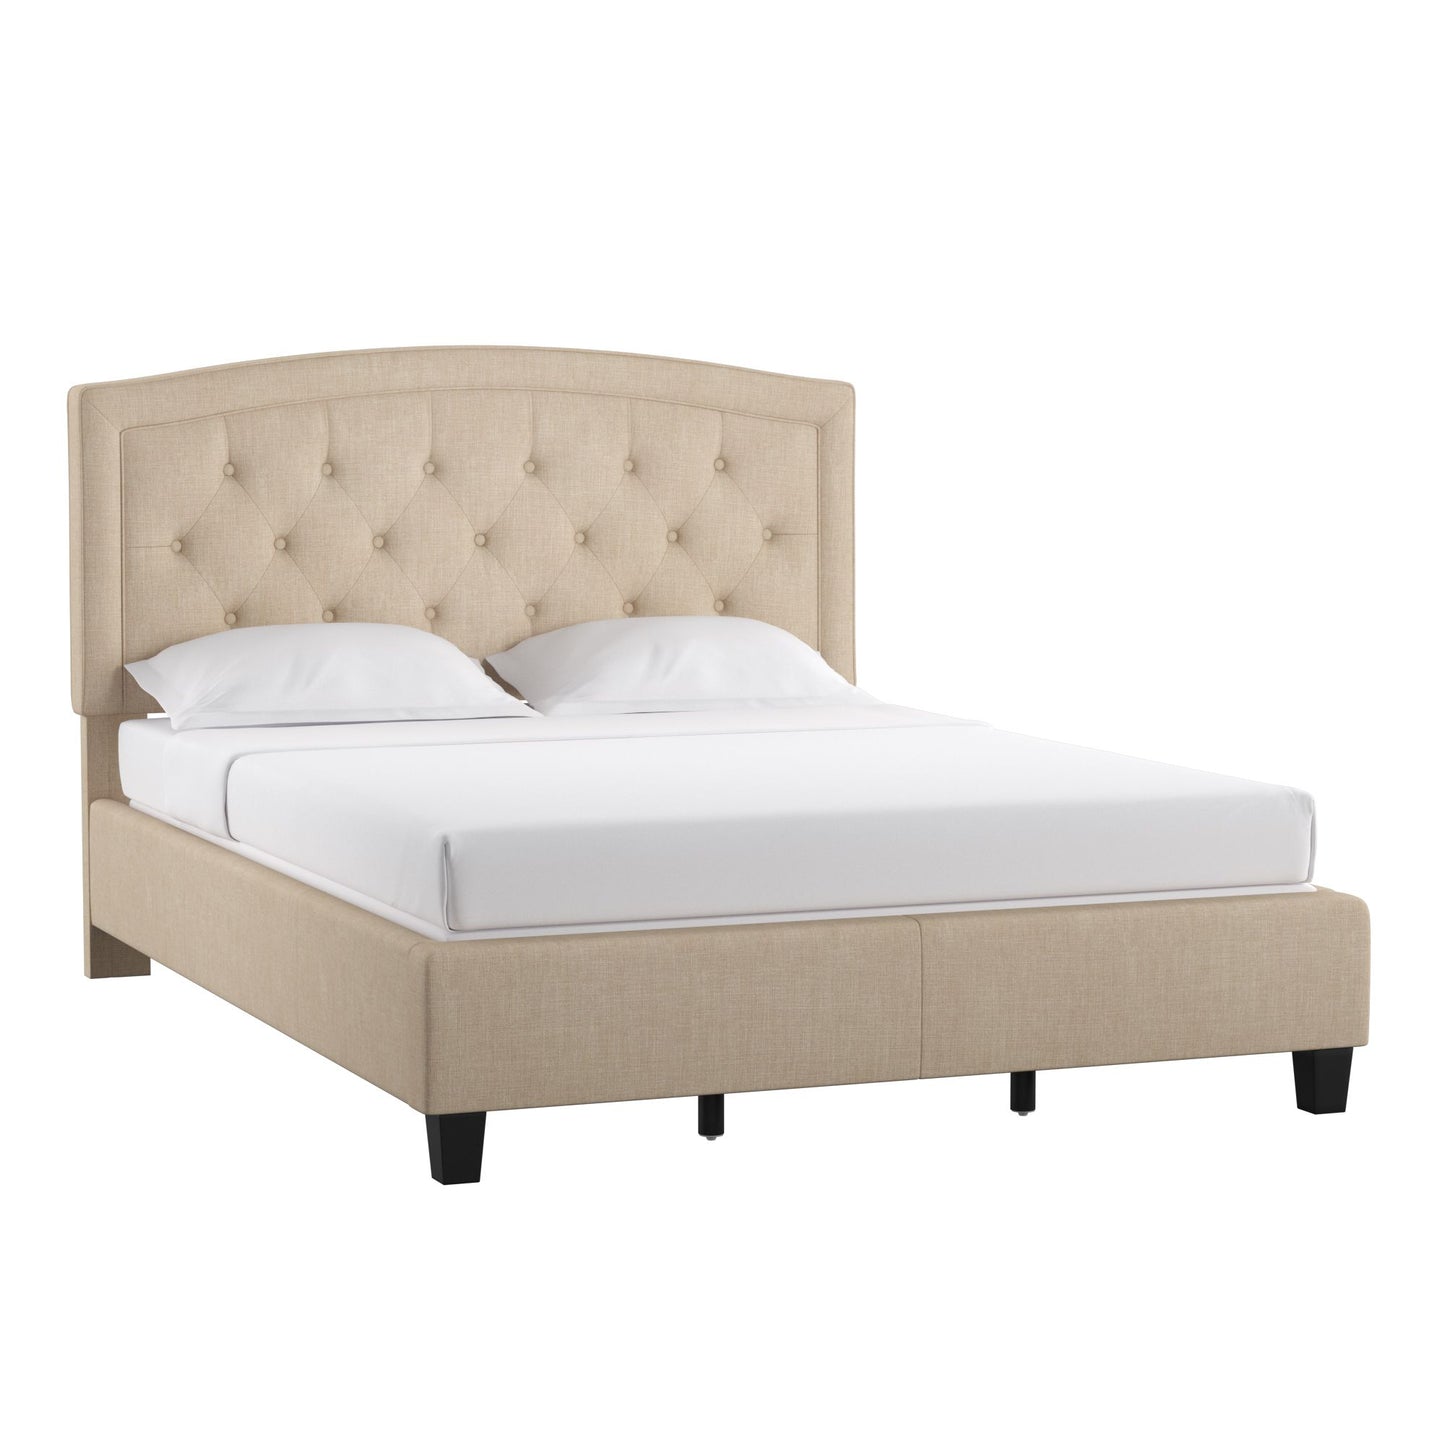 Adjustable Diamond-Tufted Arch-Back Bed - Beige, Full